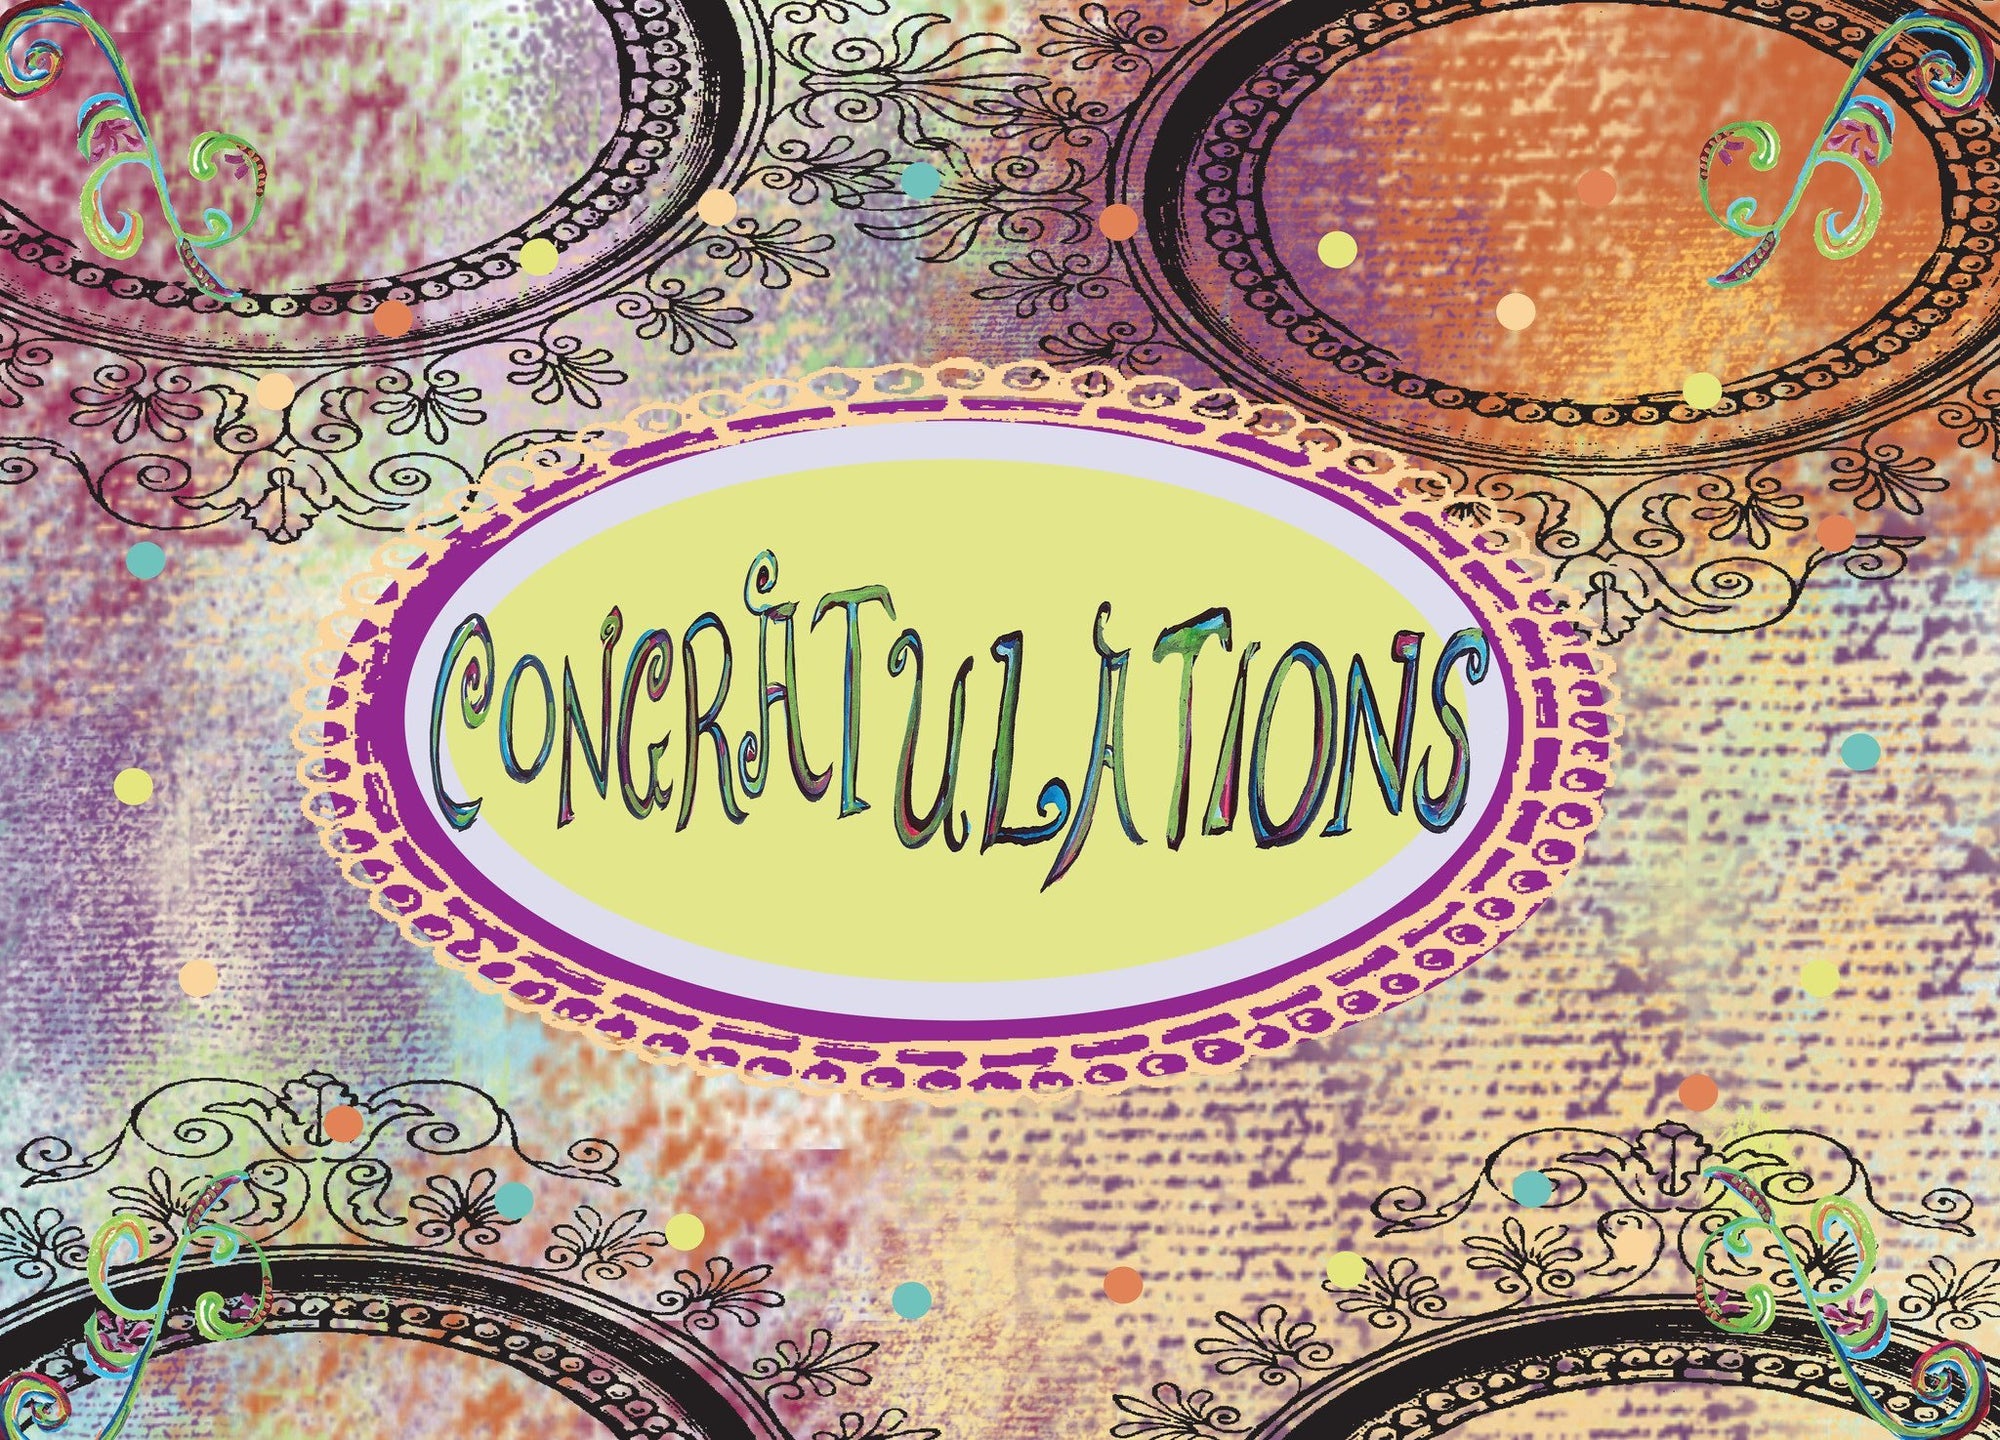 Congratulations You Deserve It! Greeting Card - Dreams After All